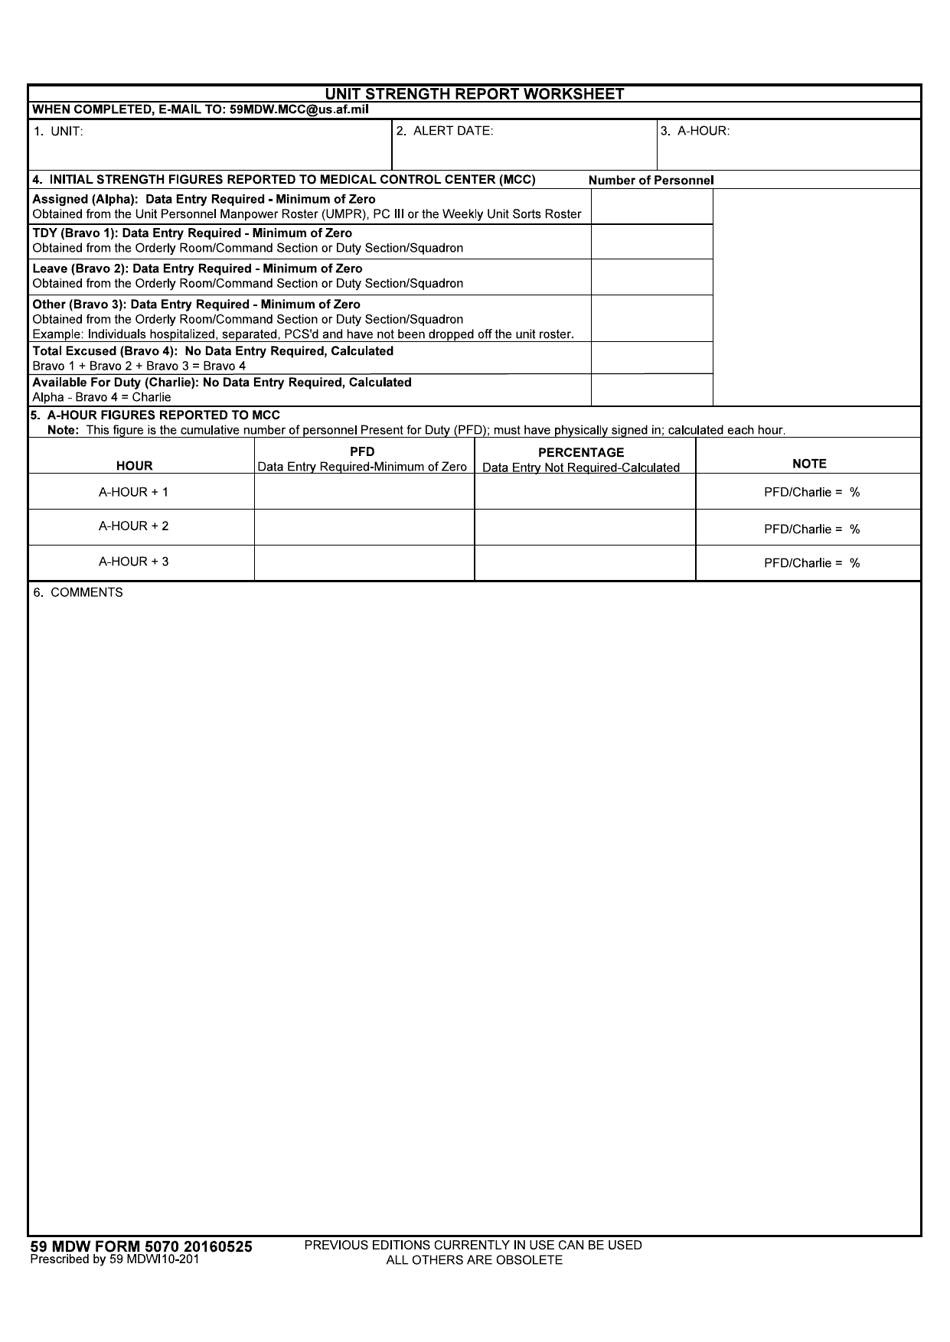 59 MDW Form 5070 Unit Strength Report Worksheet, Page 1